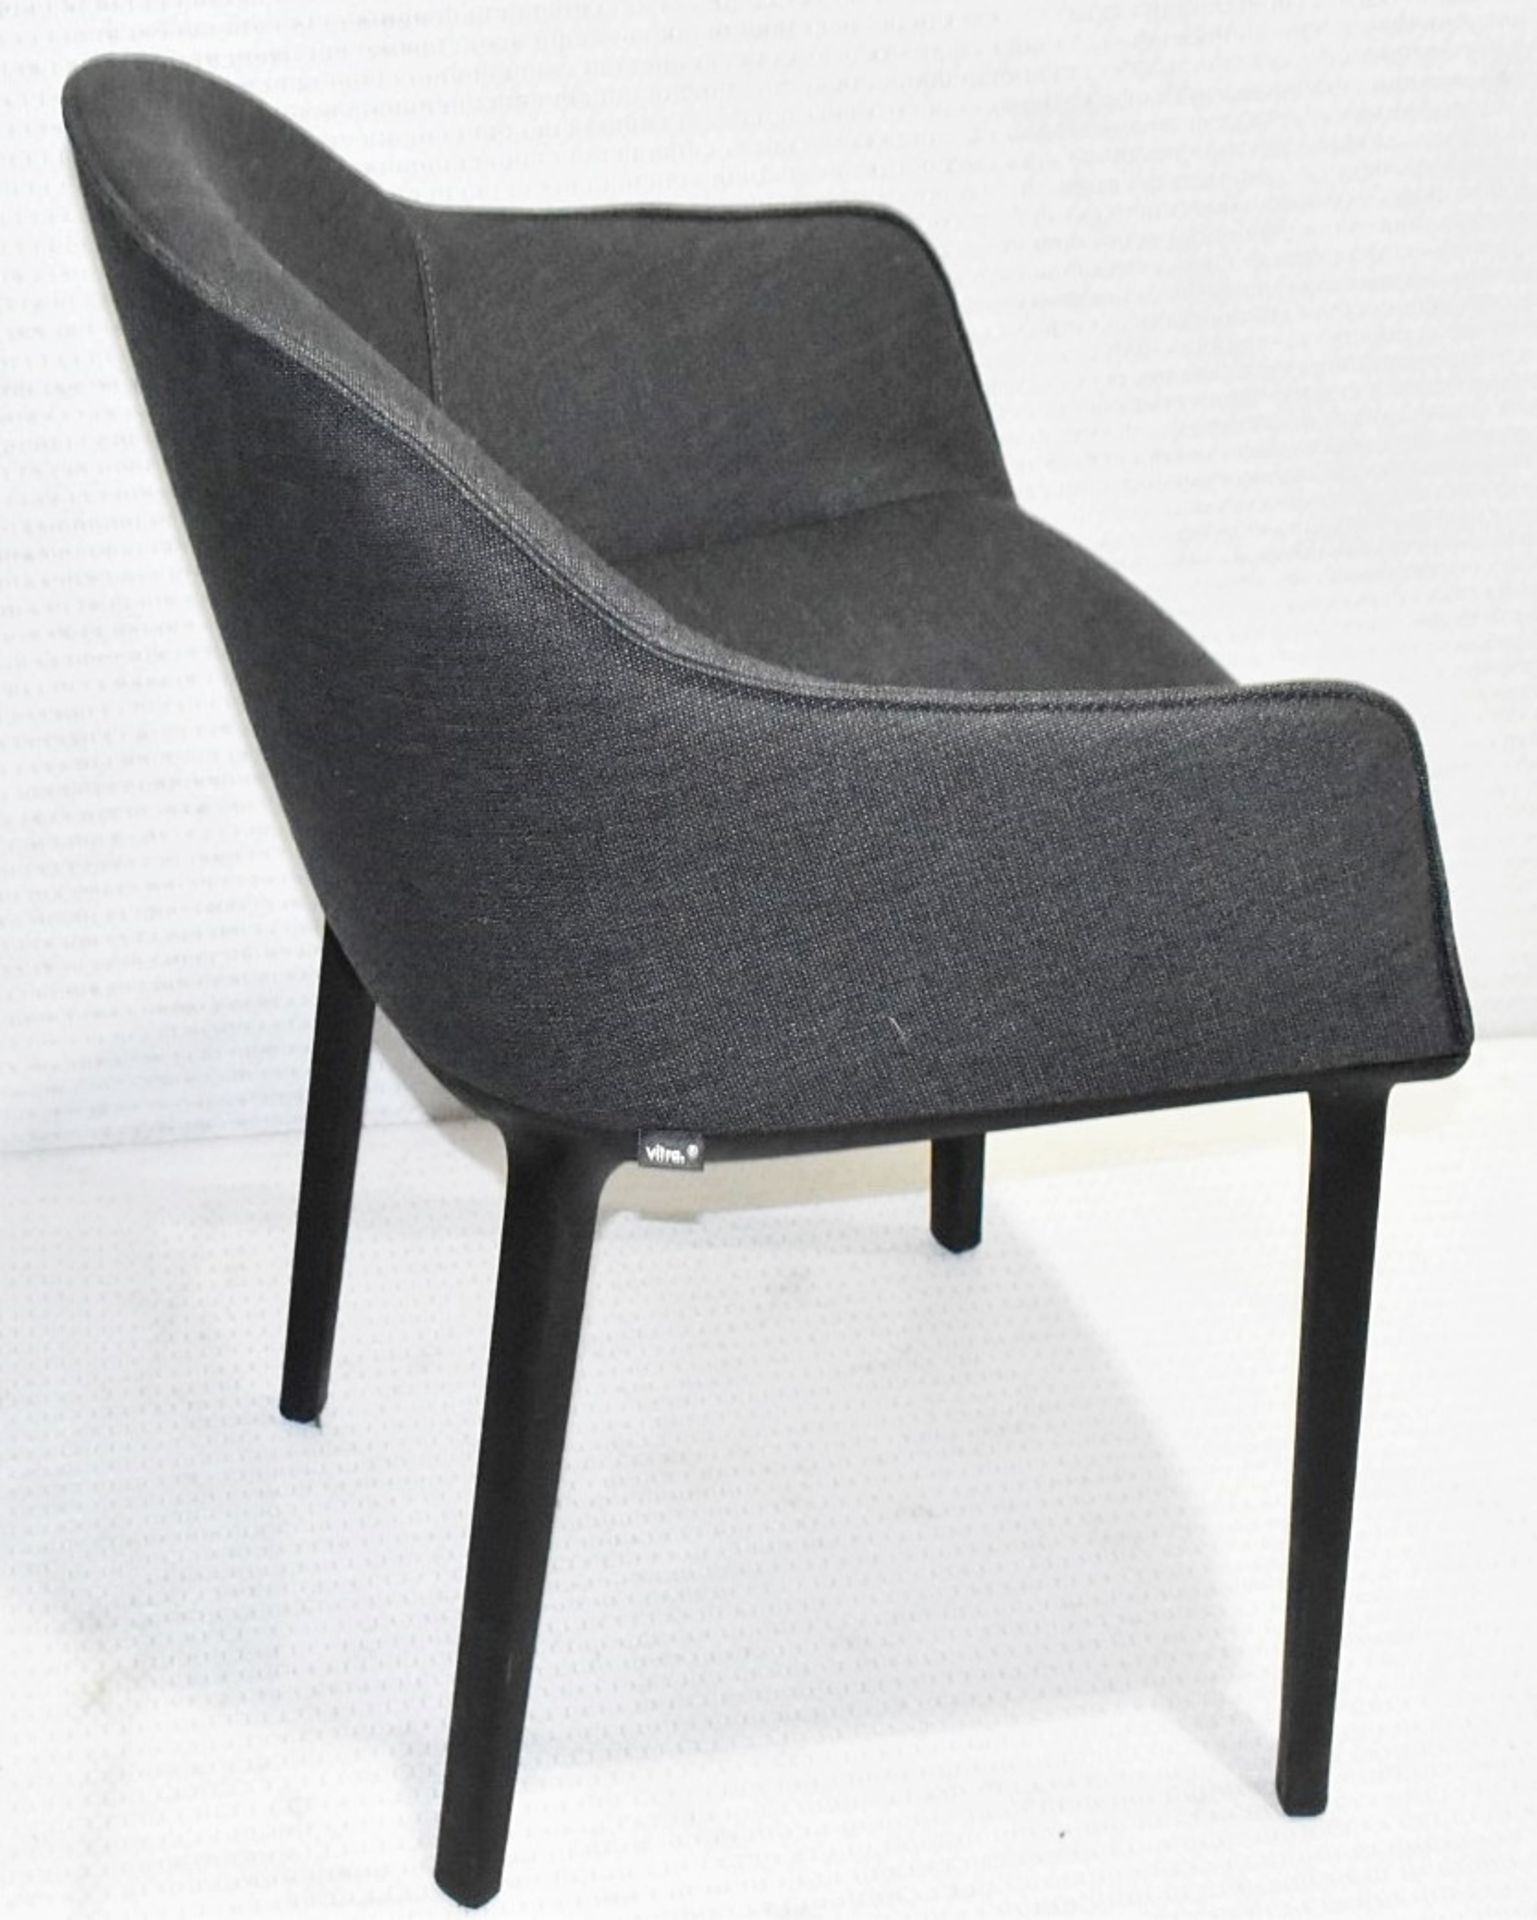 1 x VITRA 'Softshell' Fabric Upholstered Designer Plastic Armchair, in Anthracite Grey - RRP £885.00 - Image 4 of 9